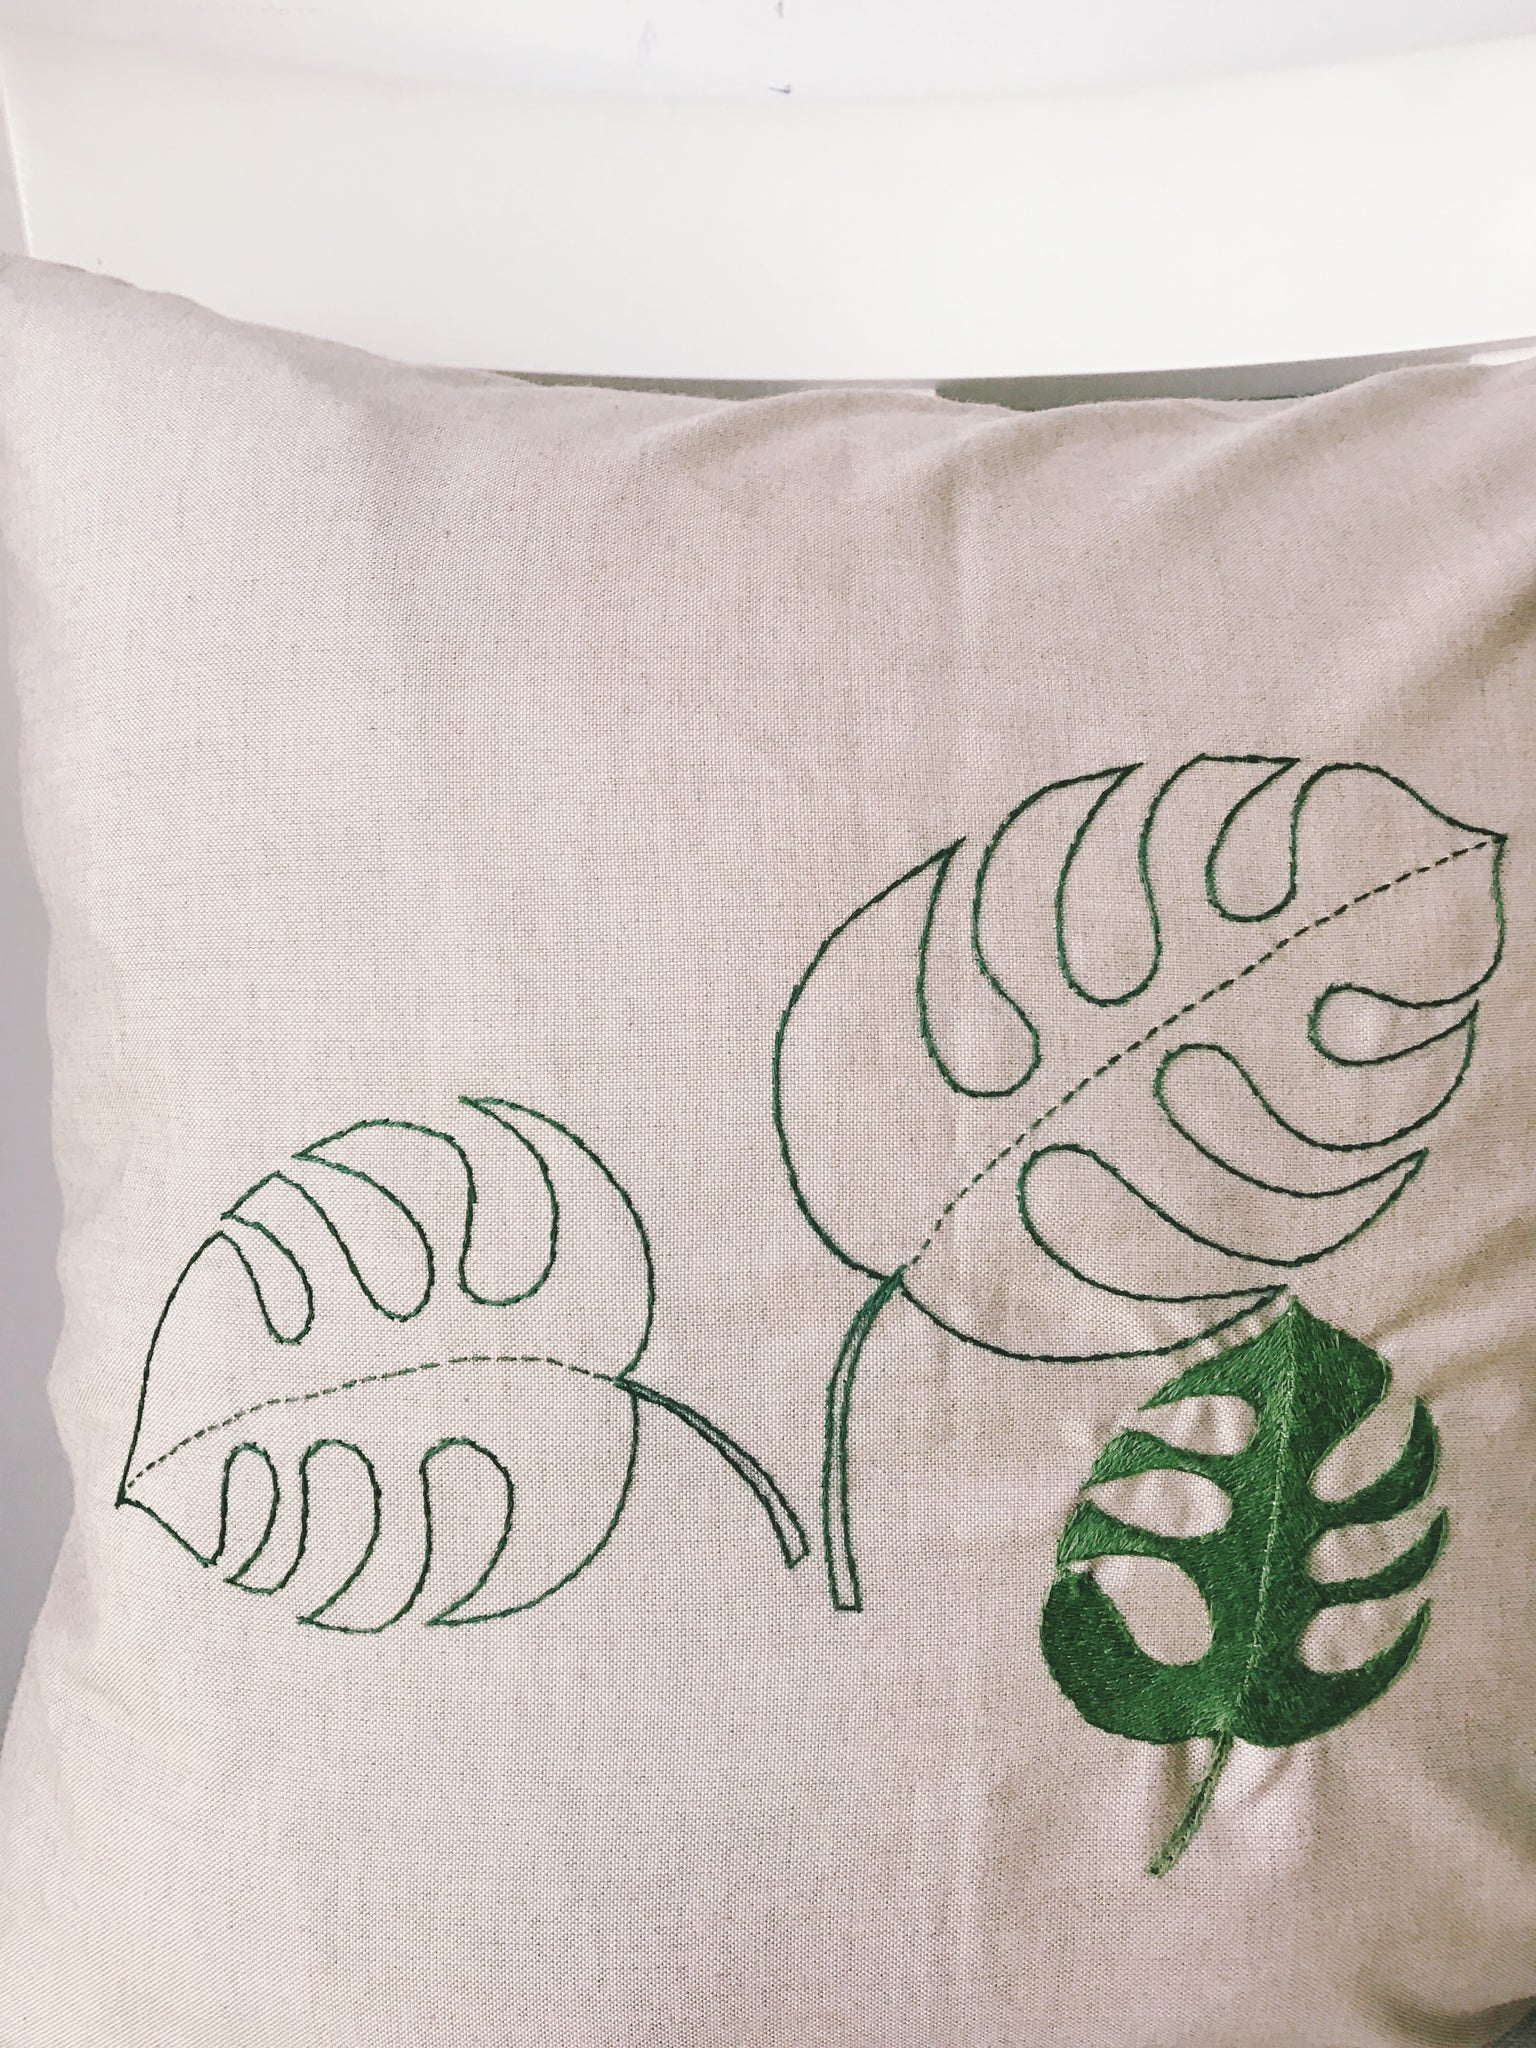 embroidered outdoor pillows